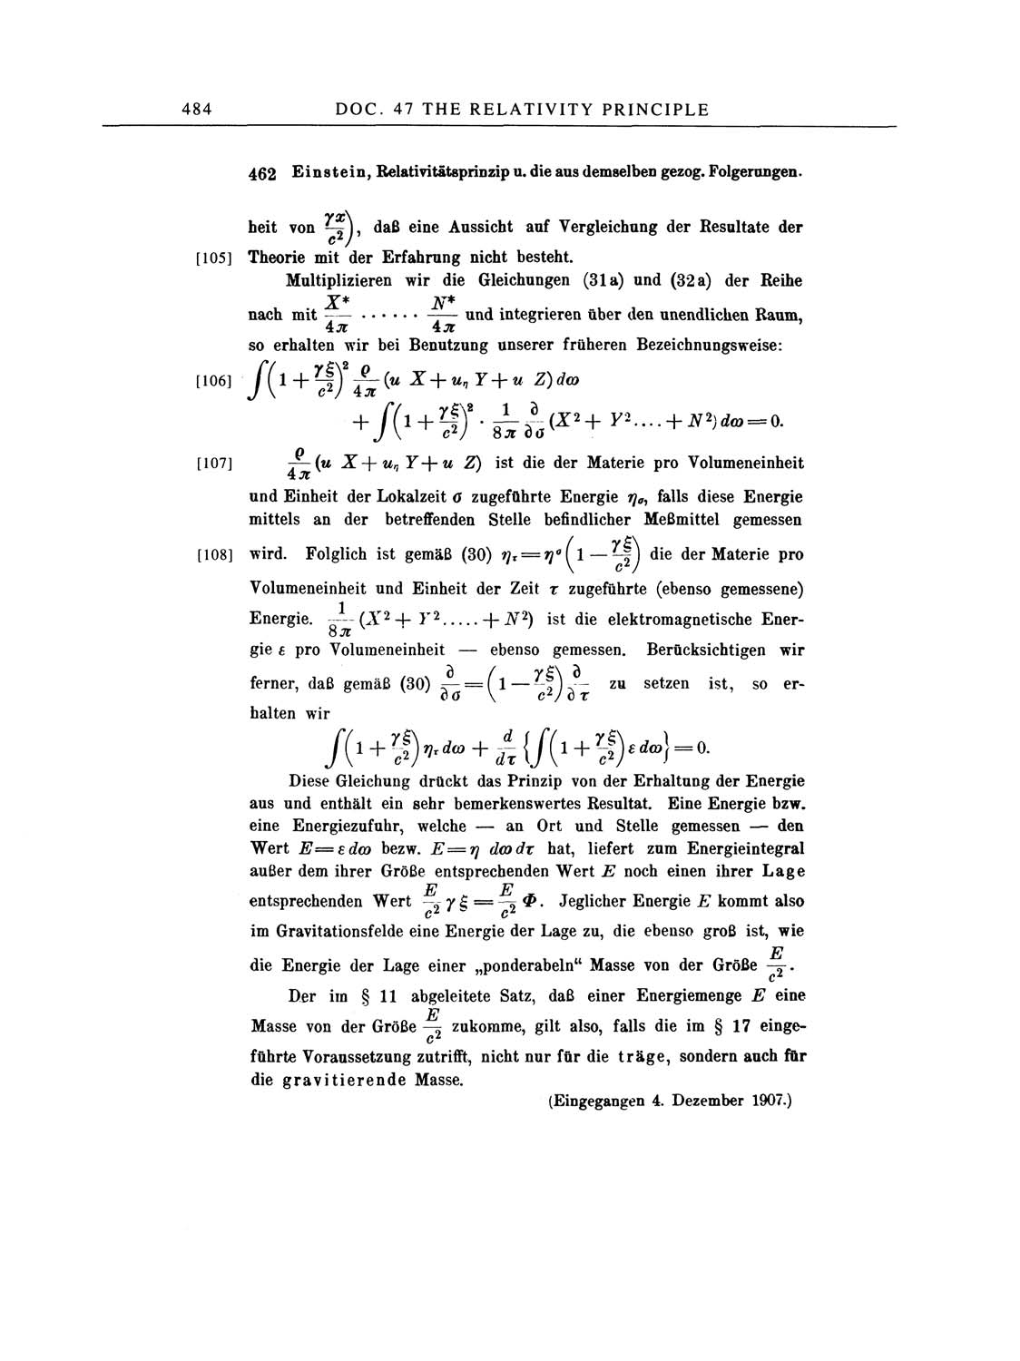 Volume 2: The Swiss Years: Writings, 1900-1909 page 484